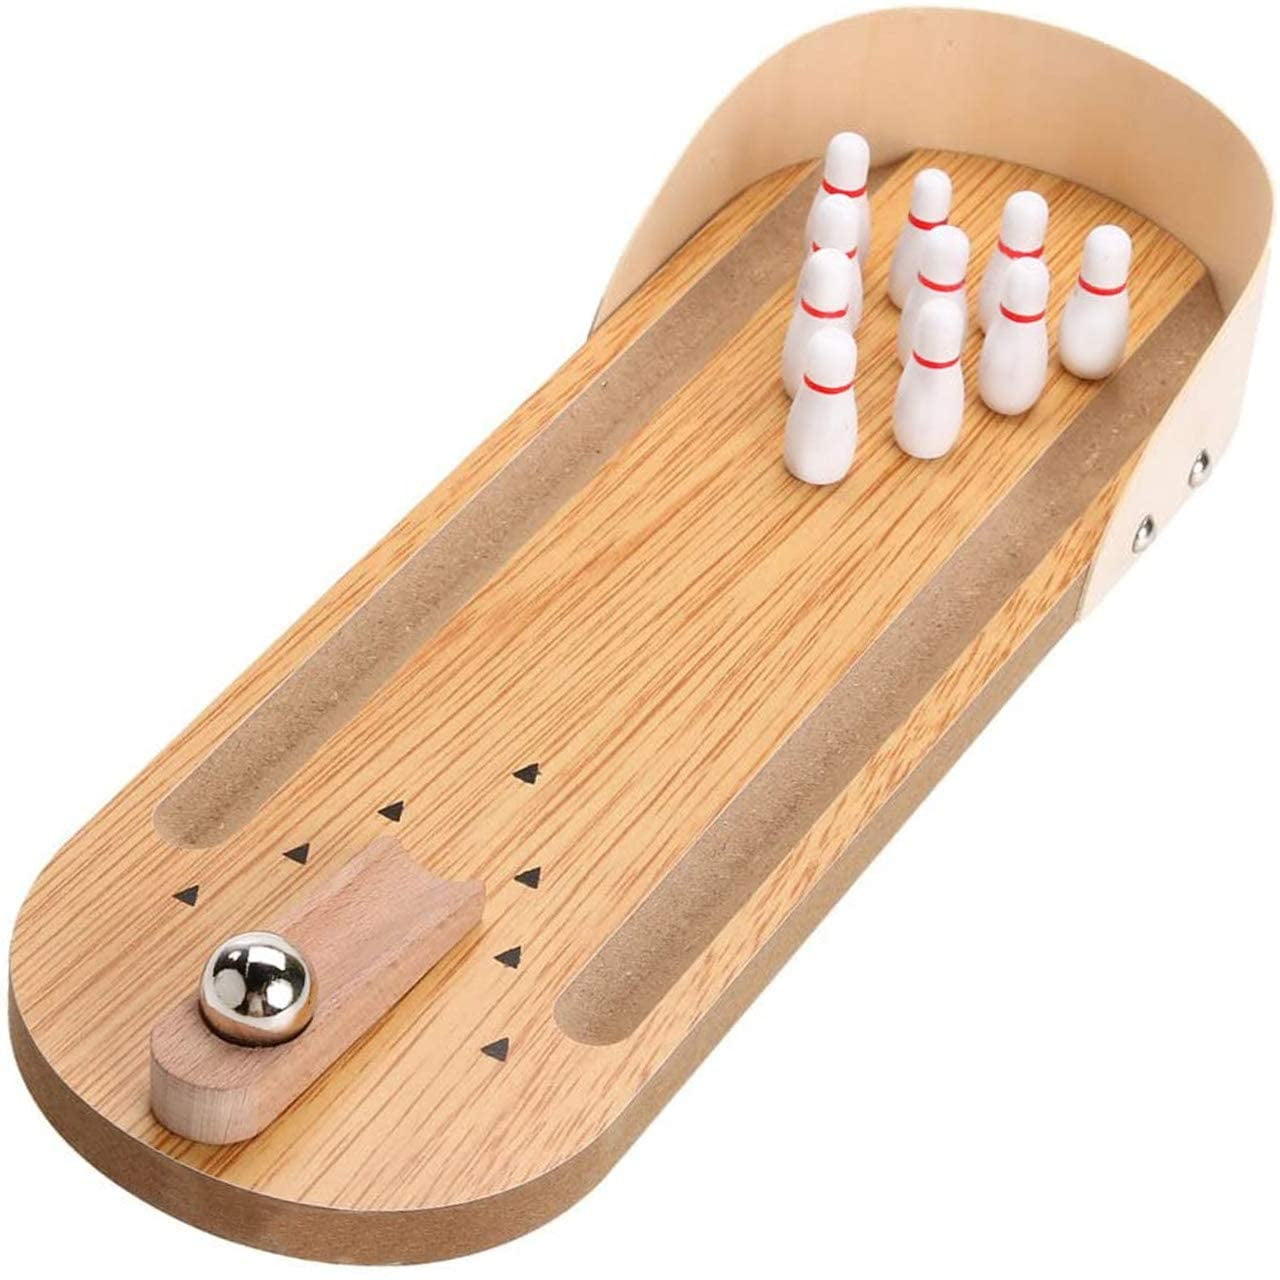 Desktop Mini Bowling Game Set - Unique Novelty Office Desk Toys - Finger Sports Cute Stocking Stuffers - Wooden Table Top Fun Family Board Games for Kids Adults